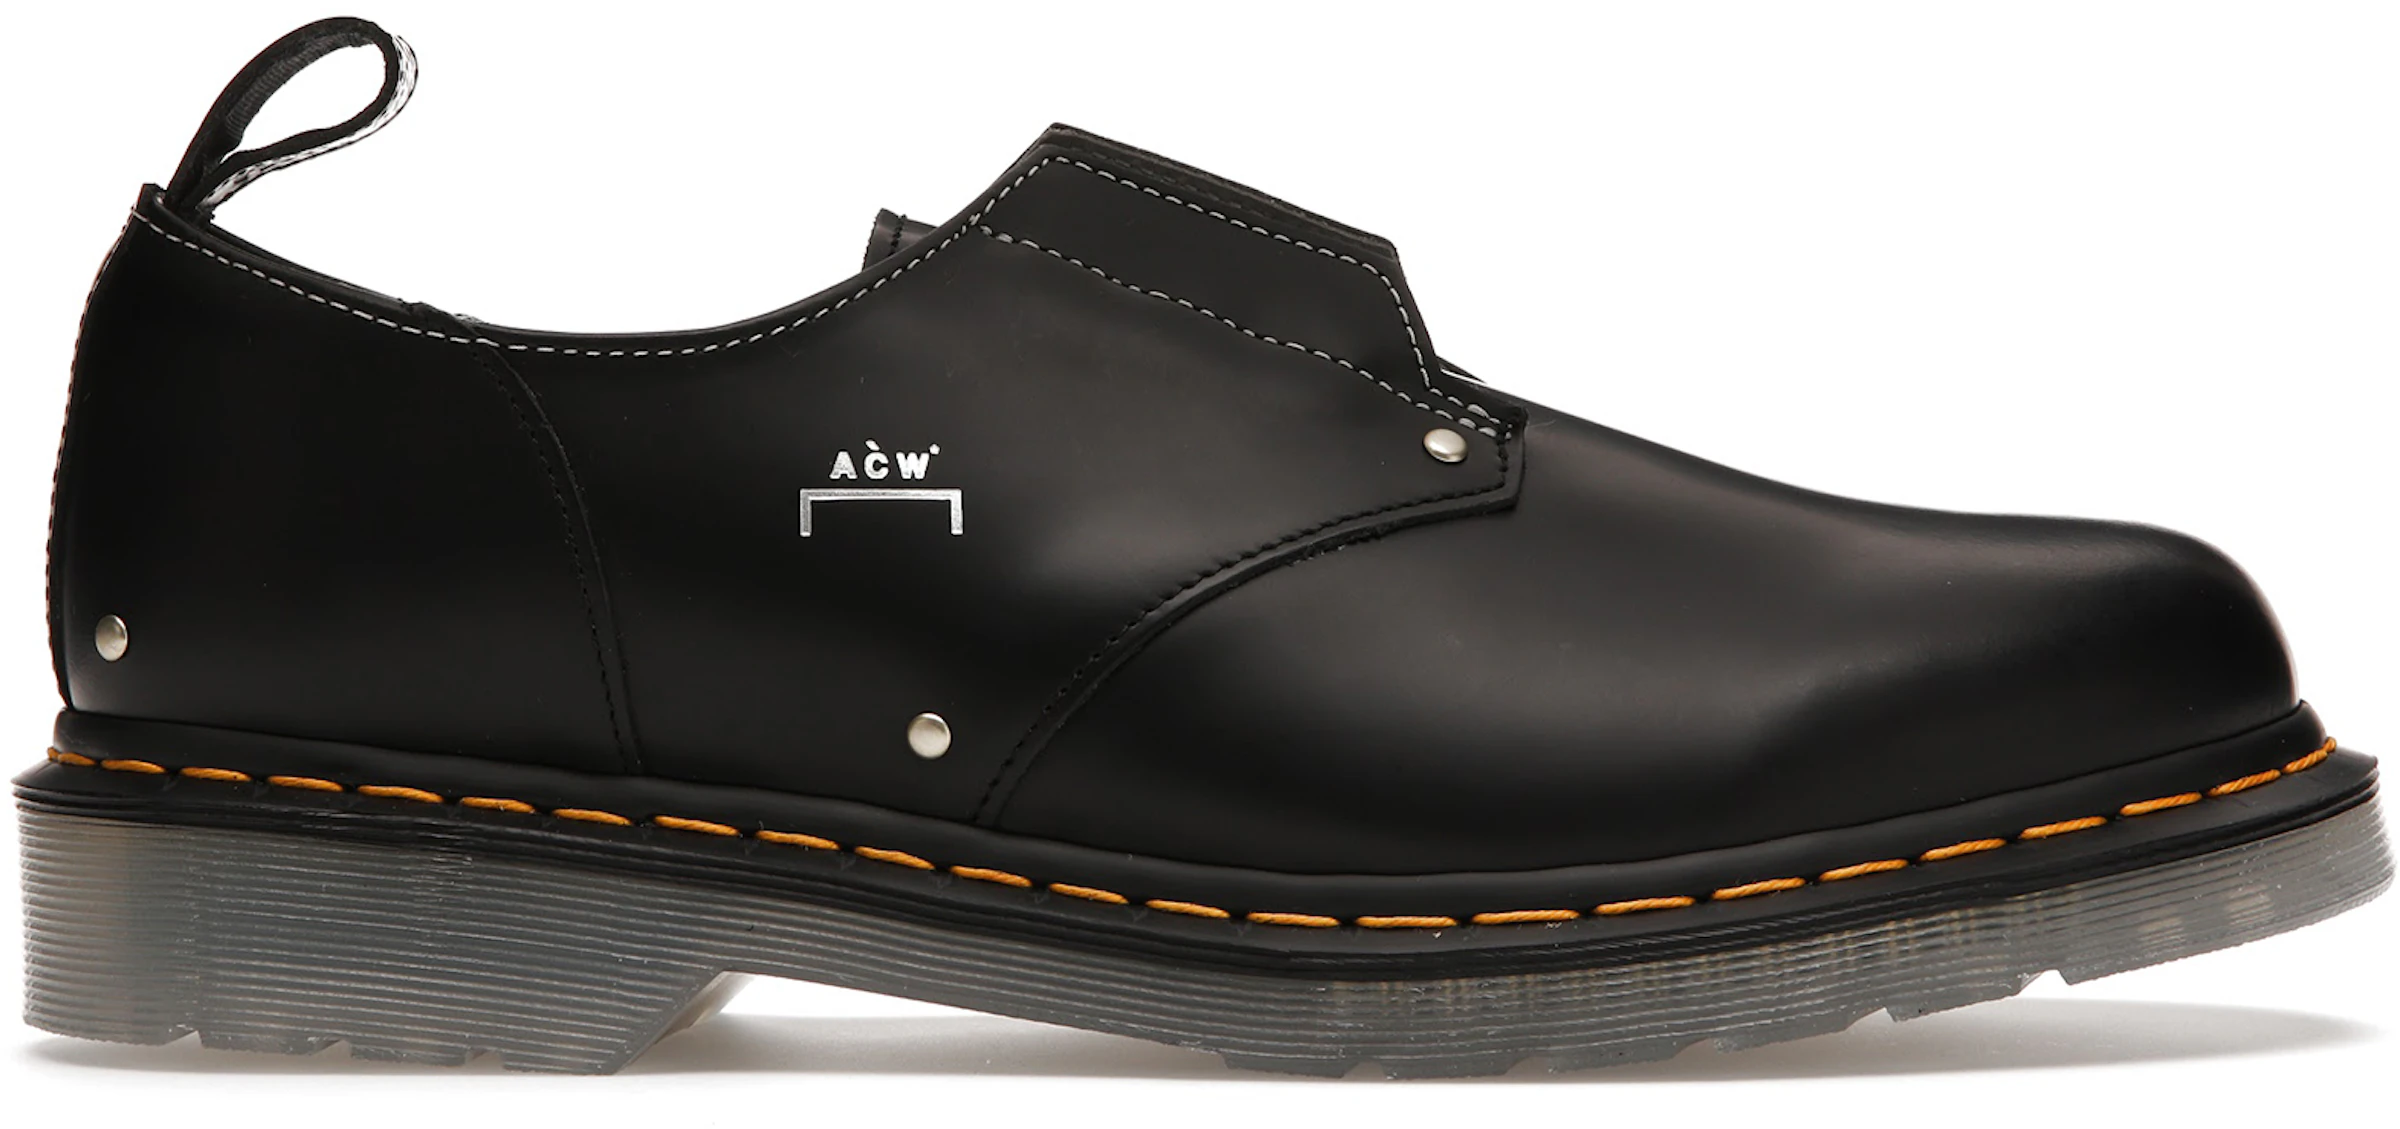 Dr. Martens 1461 Work Shoe A Cold Wall Black - 27423001 - US